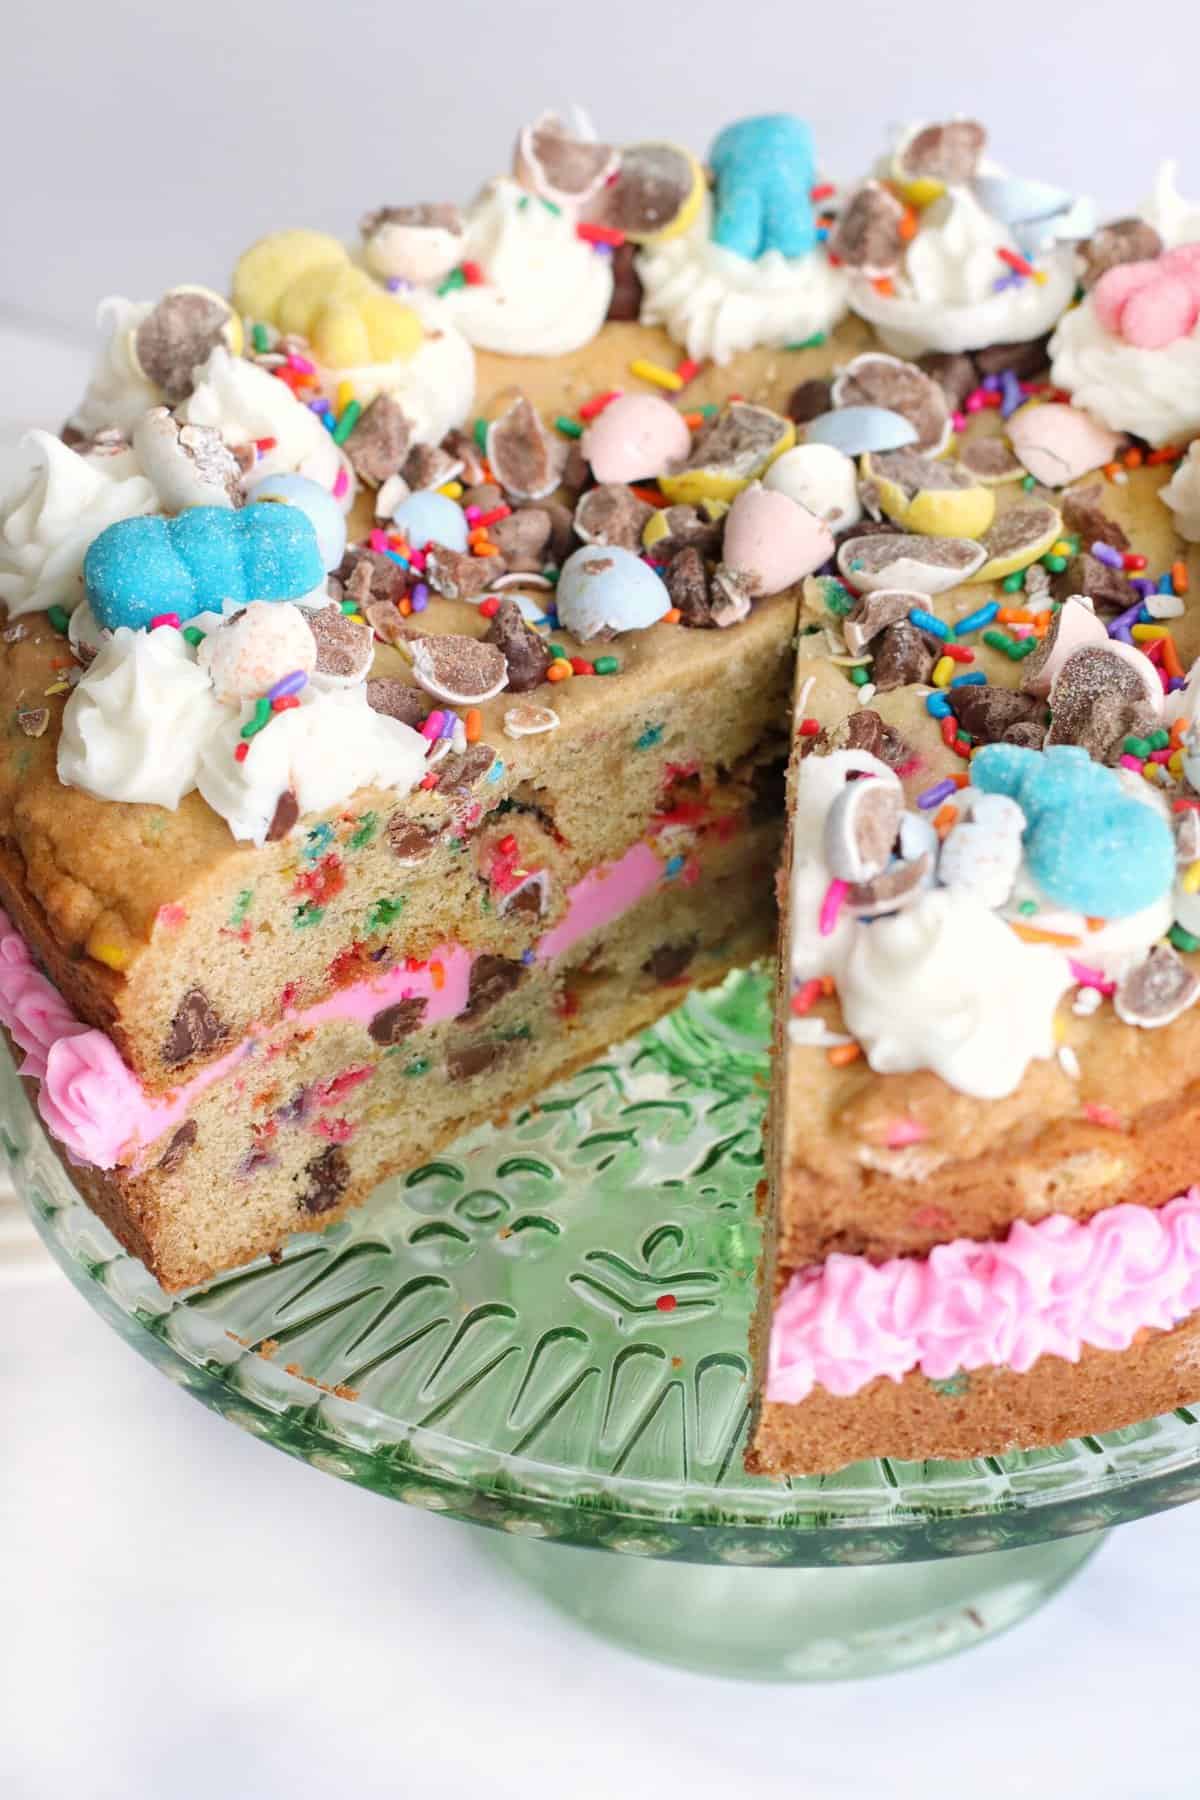 An Easter cake has been sliced into.